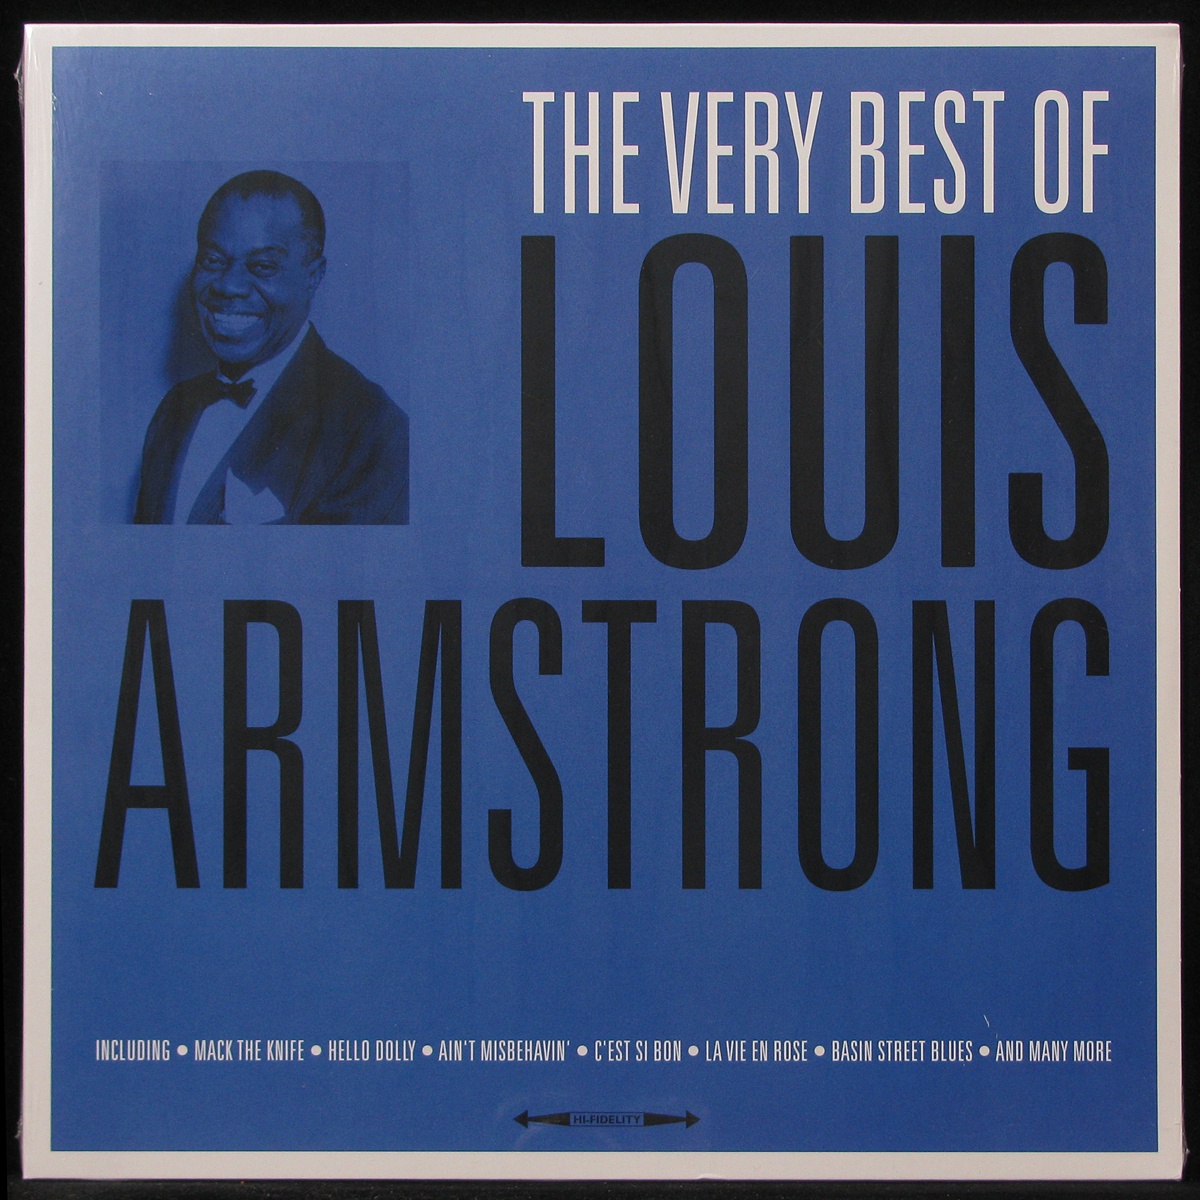 Very Best Of Louis Armstrong